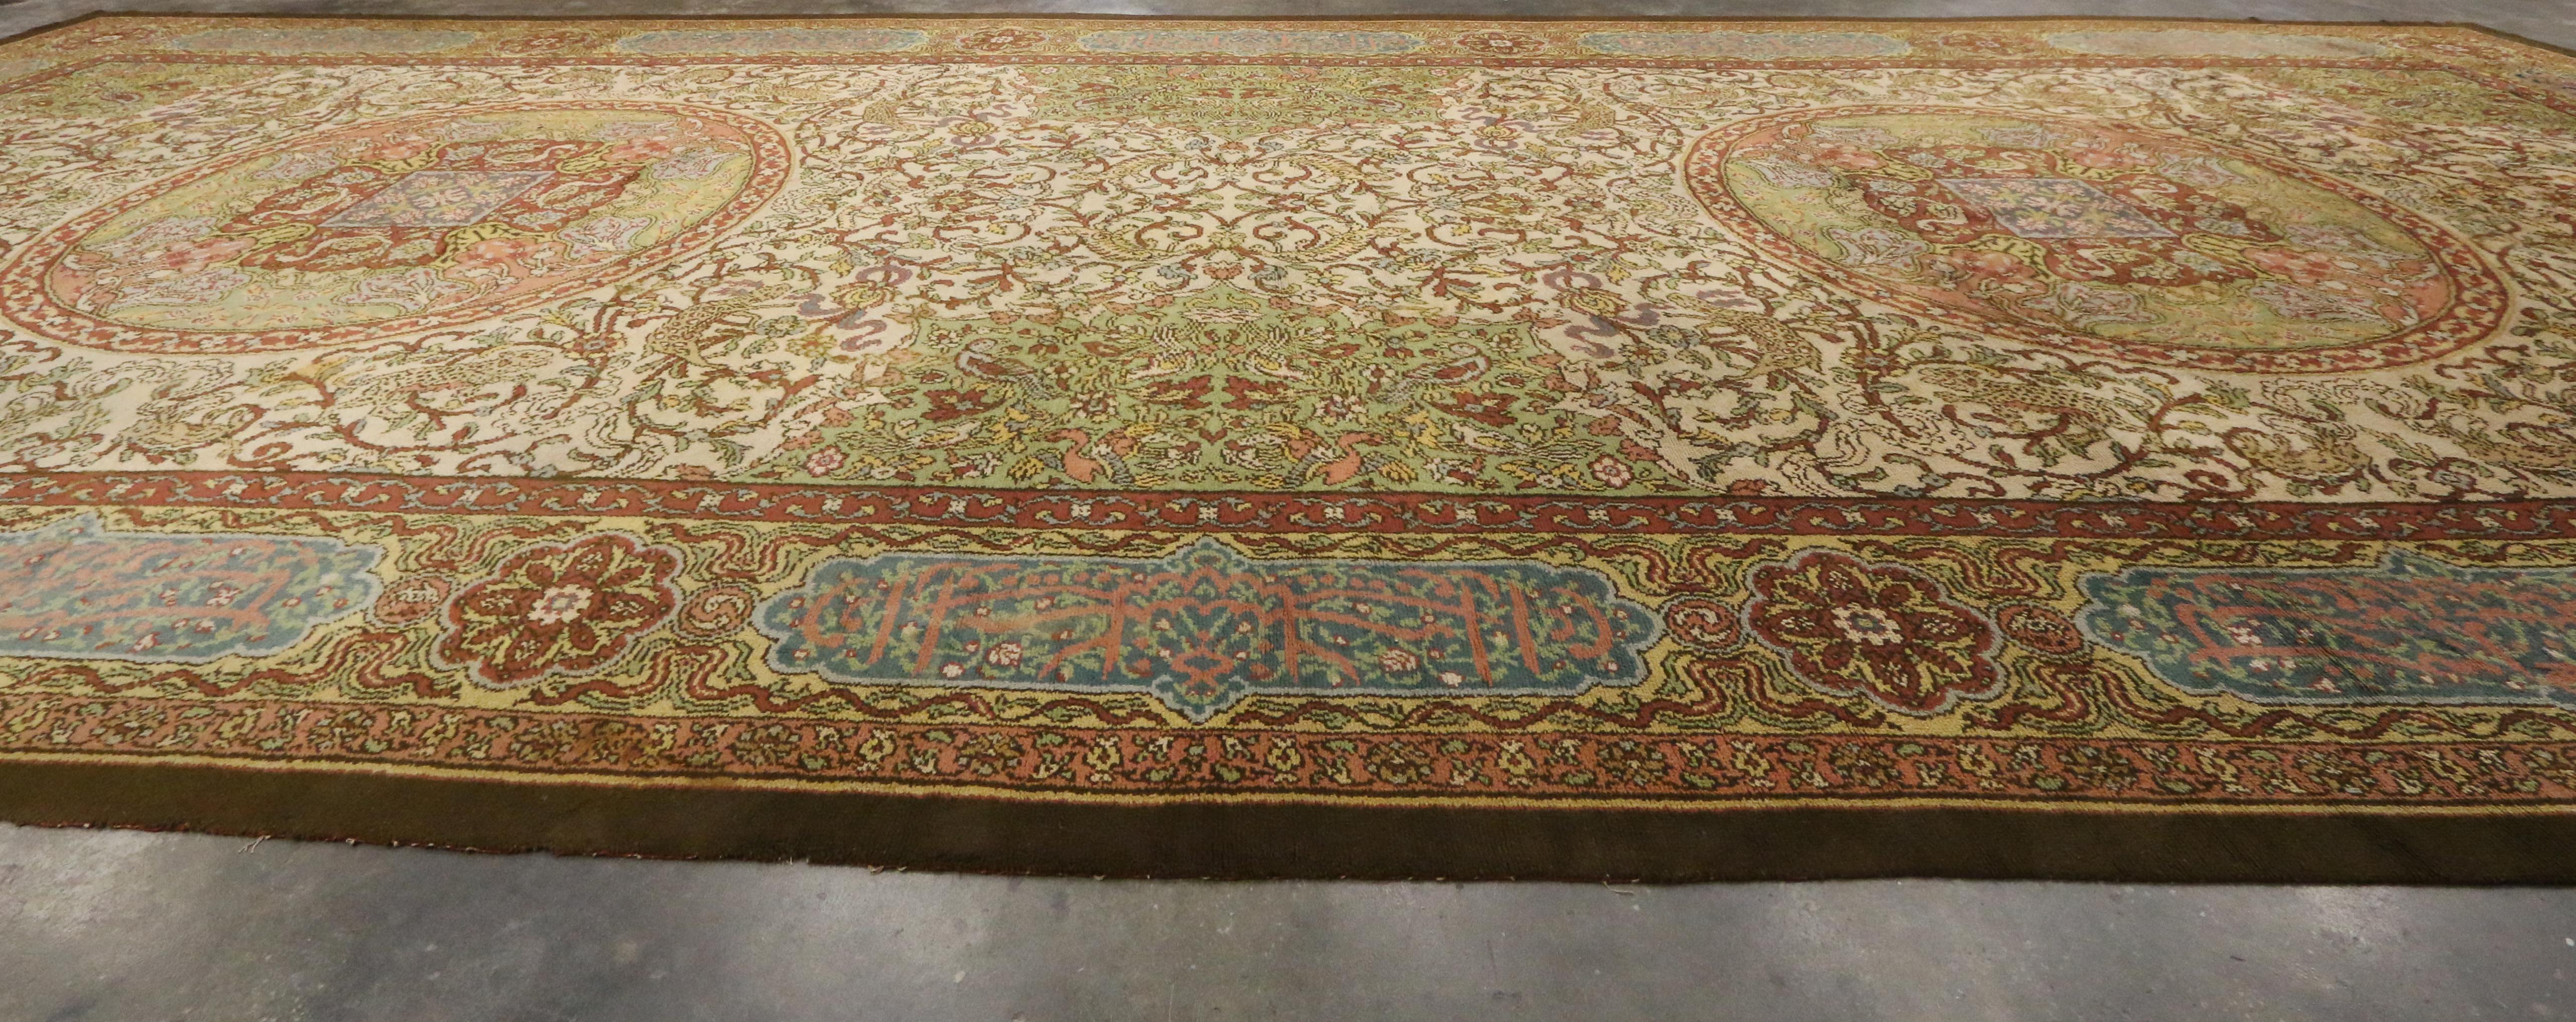 medieval style rugs